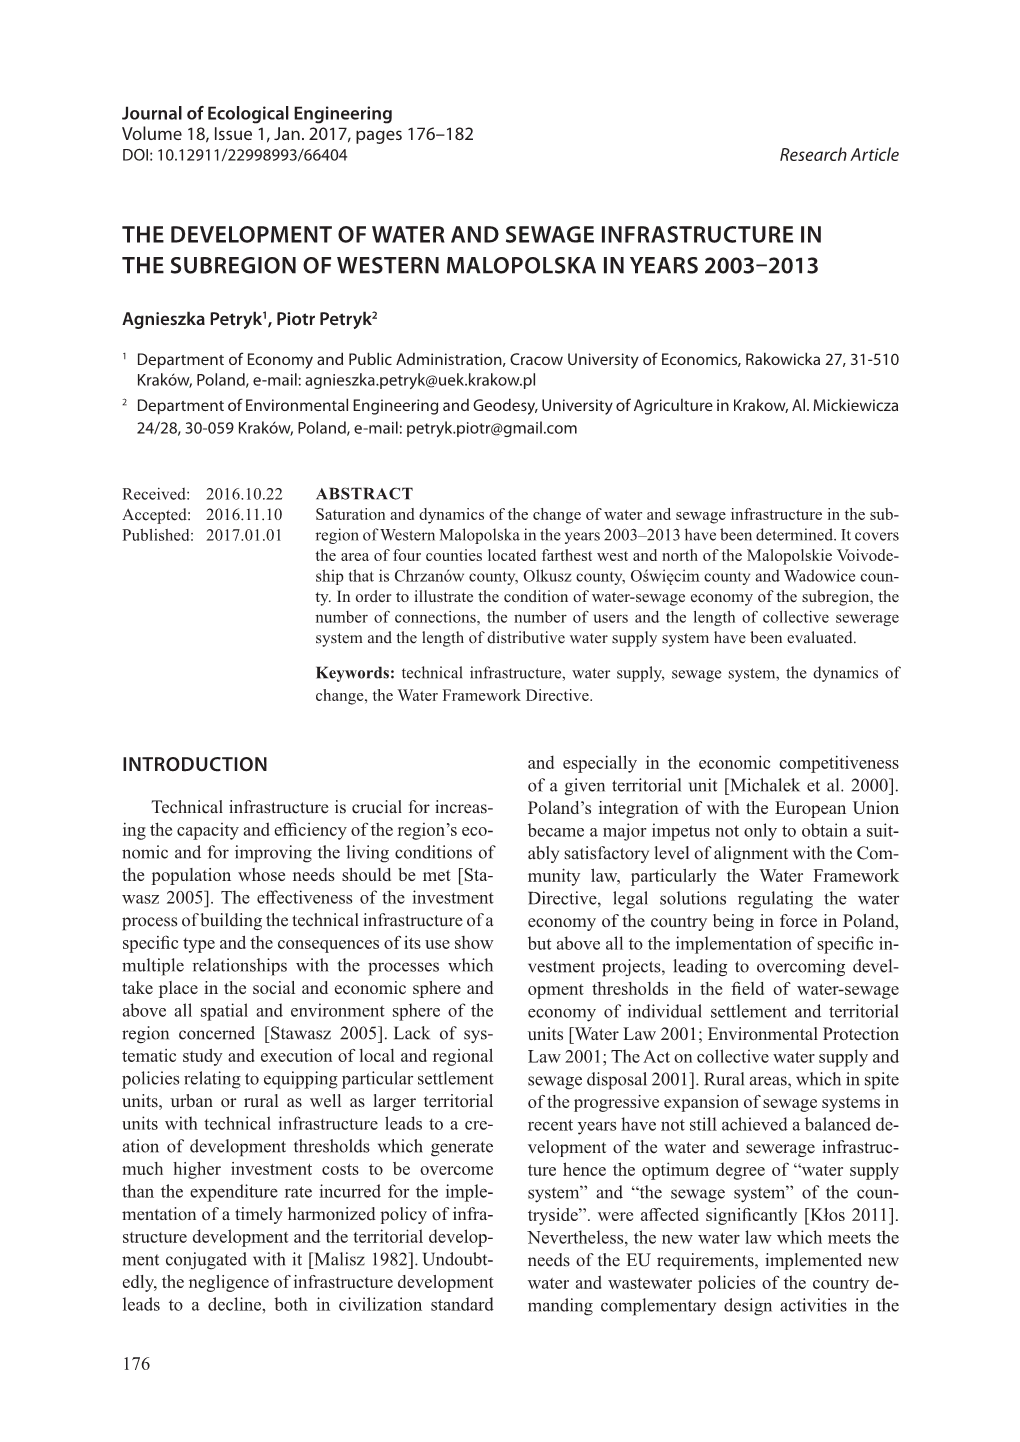 The Development of Water and Sewage Infrastructure in the Subregion of Western Malopolska in Years 2003–2013